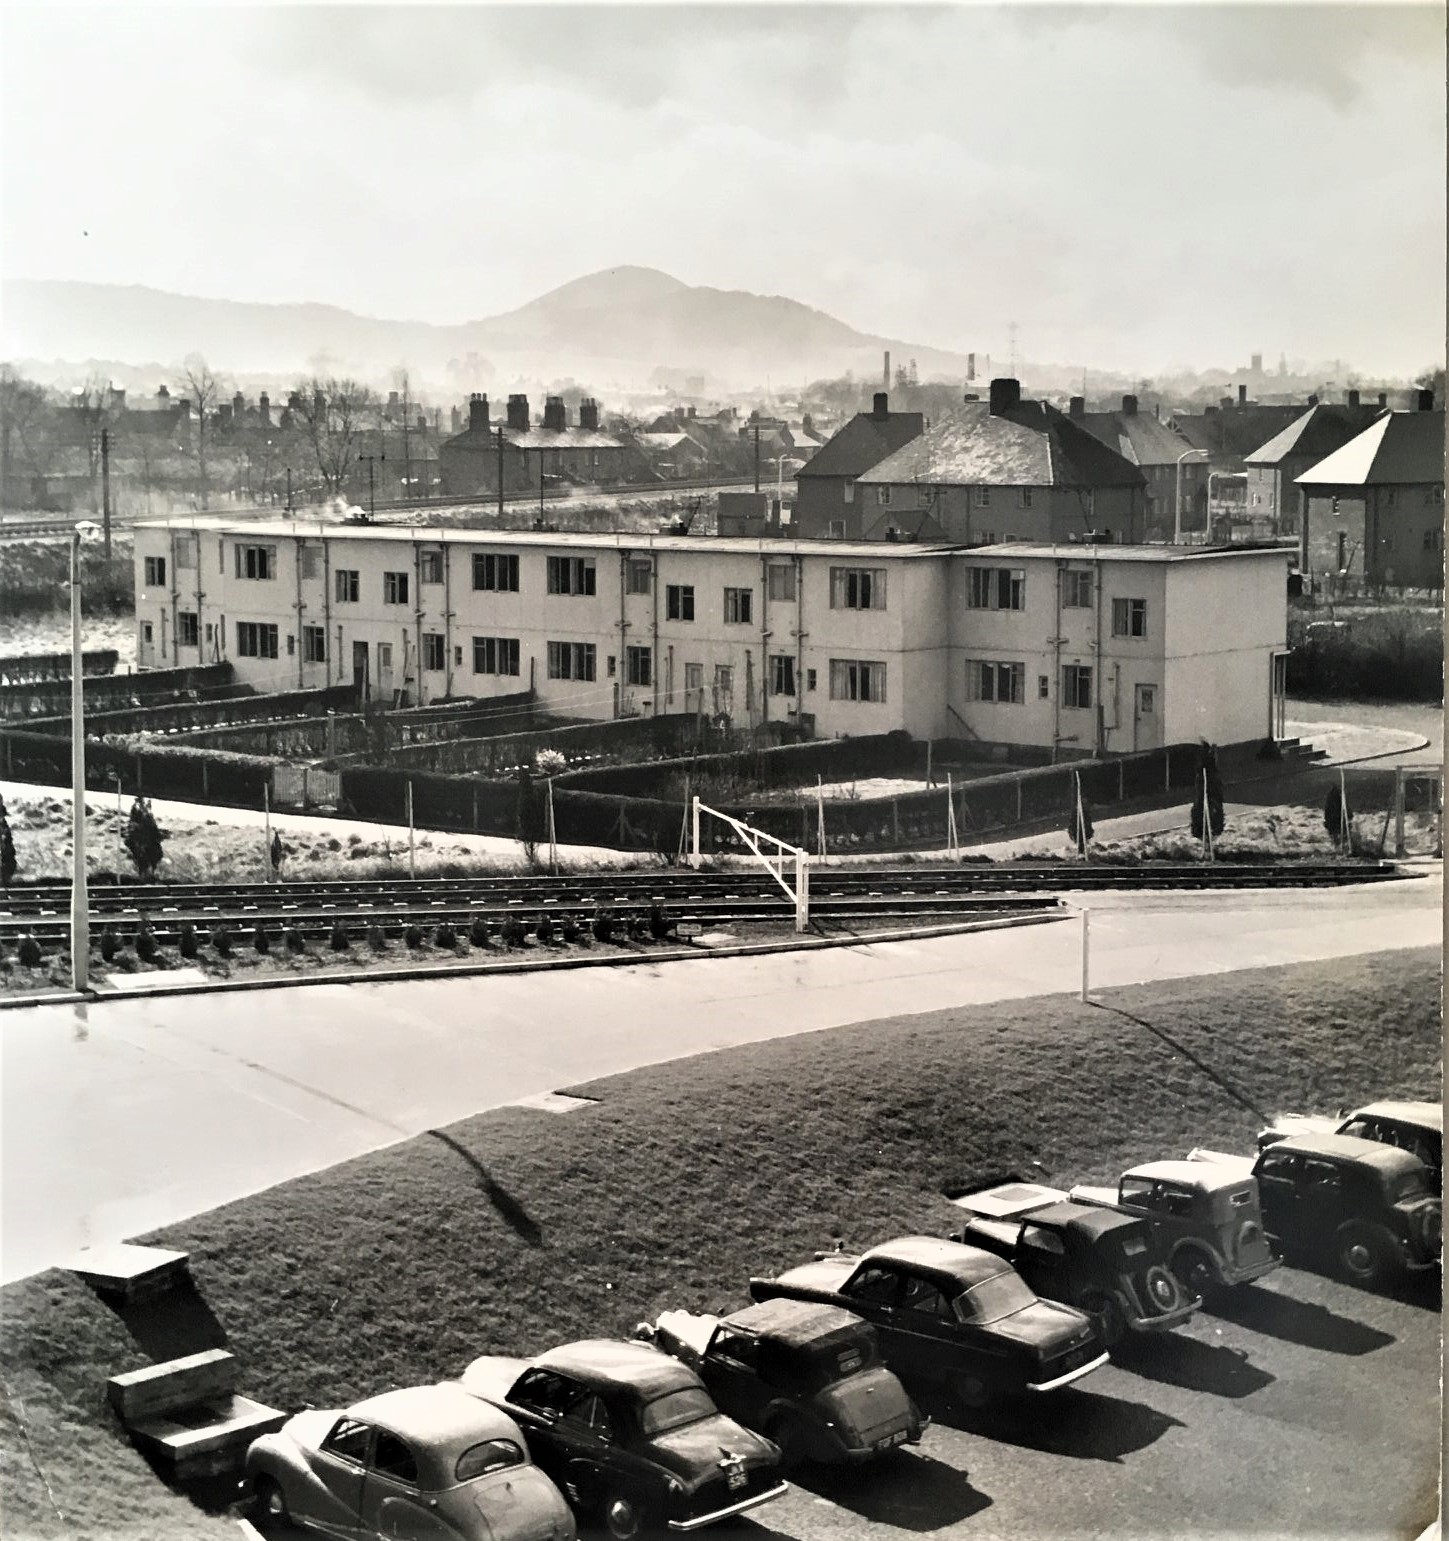 "Weir Houses" were built at Sankeys. Taking over 100 hours to erect they were sent to badly bombed areas to replace destroyed housing. Named after Lord Weir whose Scottish company was also involved in the manufacture of prefabricated housing. Some were built locally and occupied by workers from Sankeys (called Weir Gardens)(now demolished).